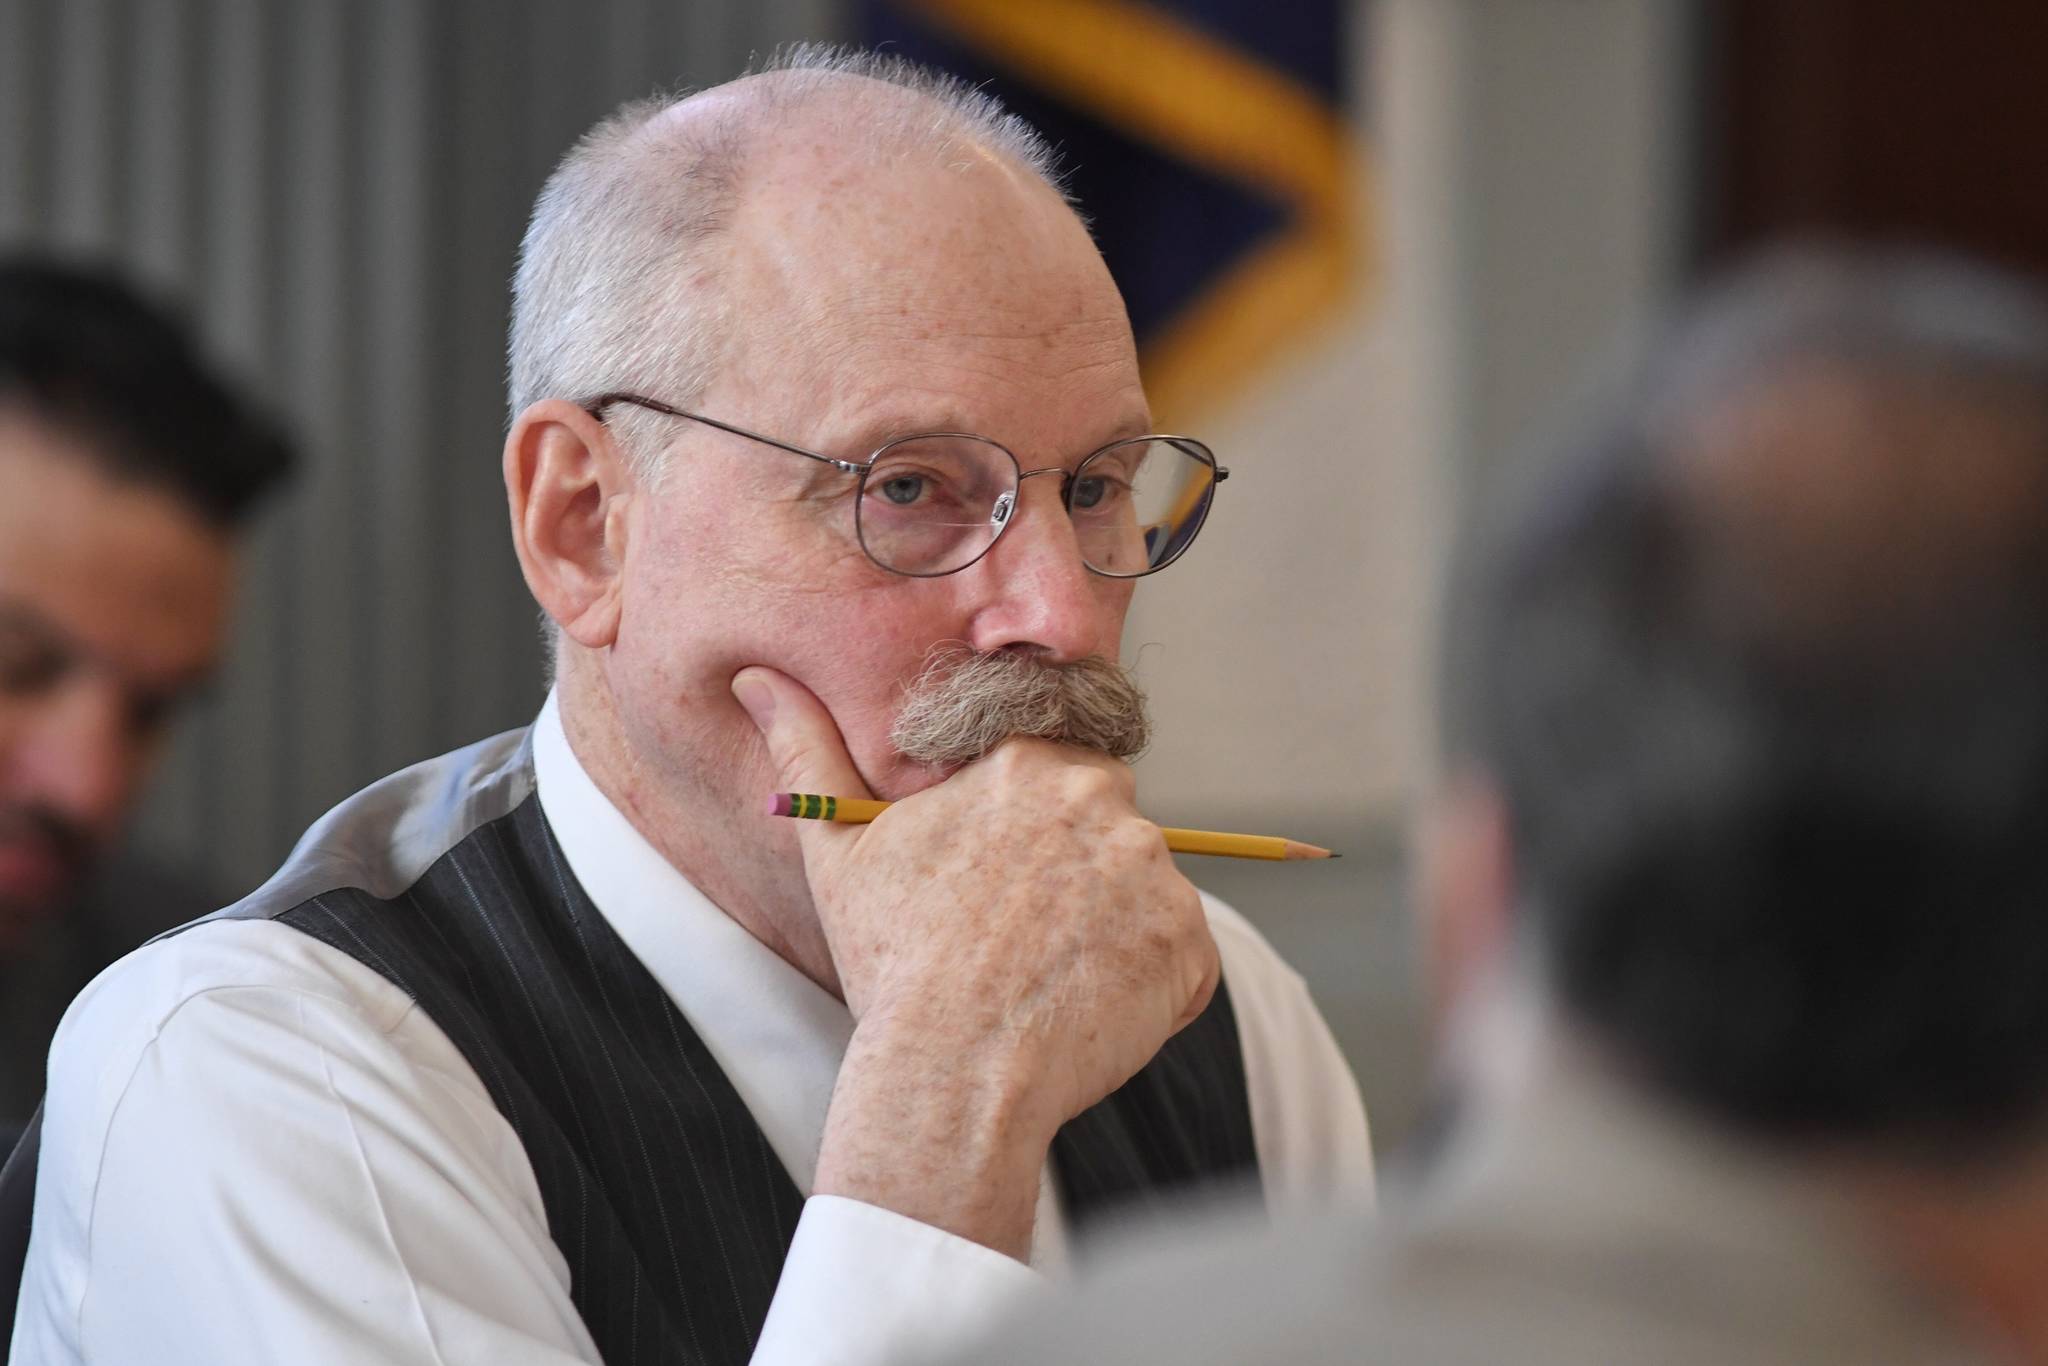 Sen. Bert Stedman, R-Sitka, listens to Finance Division Director David Teal answers questions from the Senate Finance Committee on the state’s budget at the Capitol on Thursday, April 25, 2019. (Michael Penn | Juneau Empire)